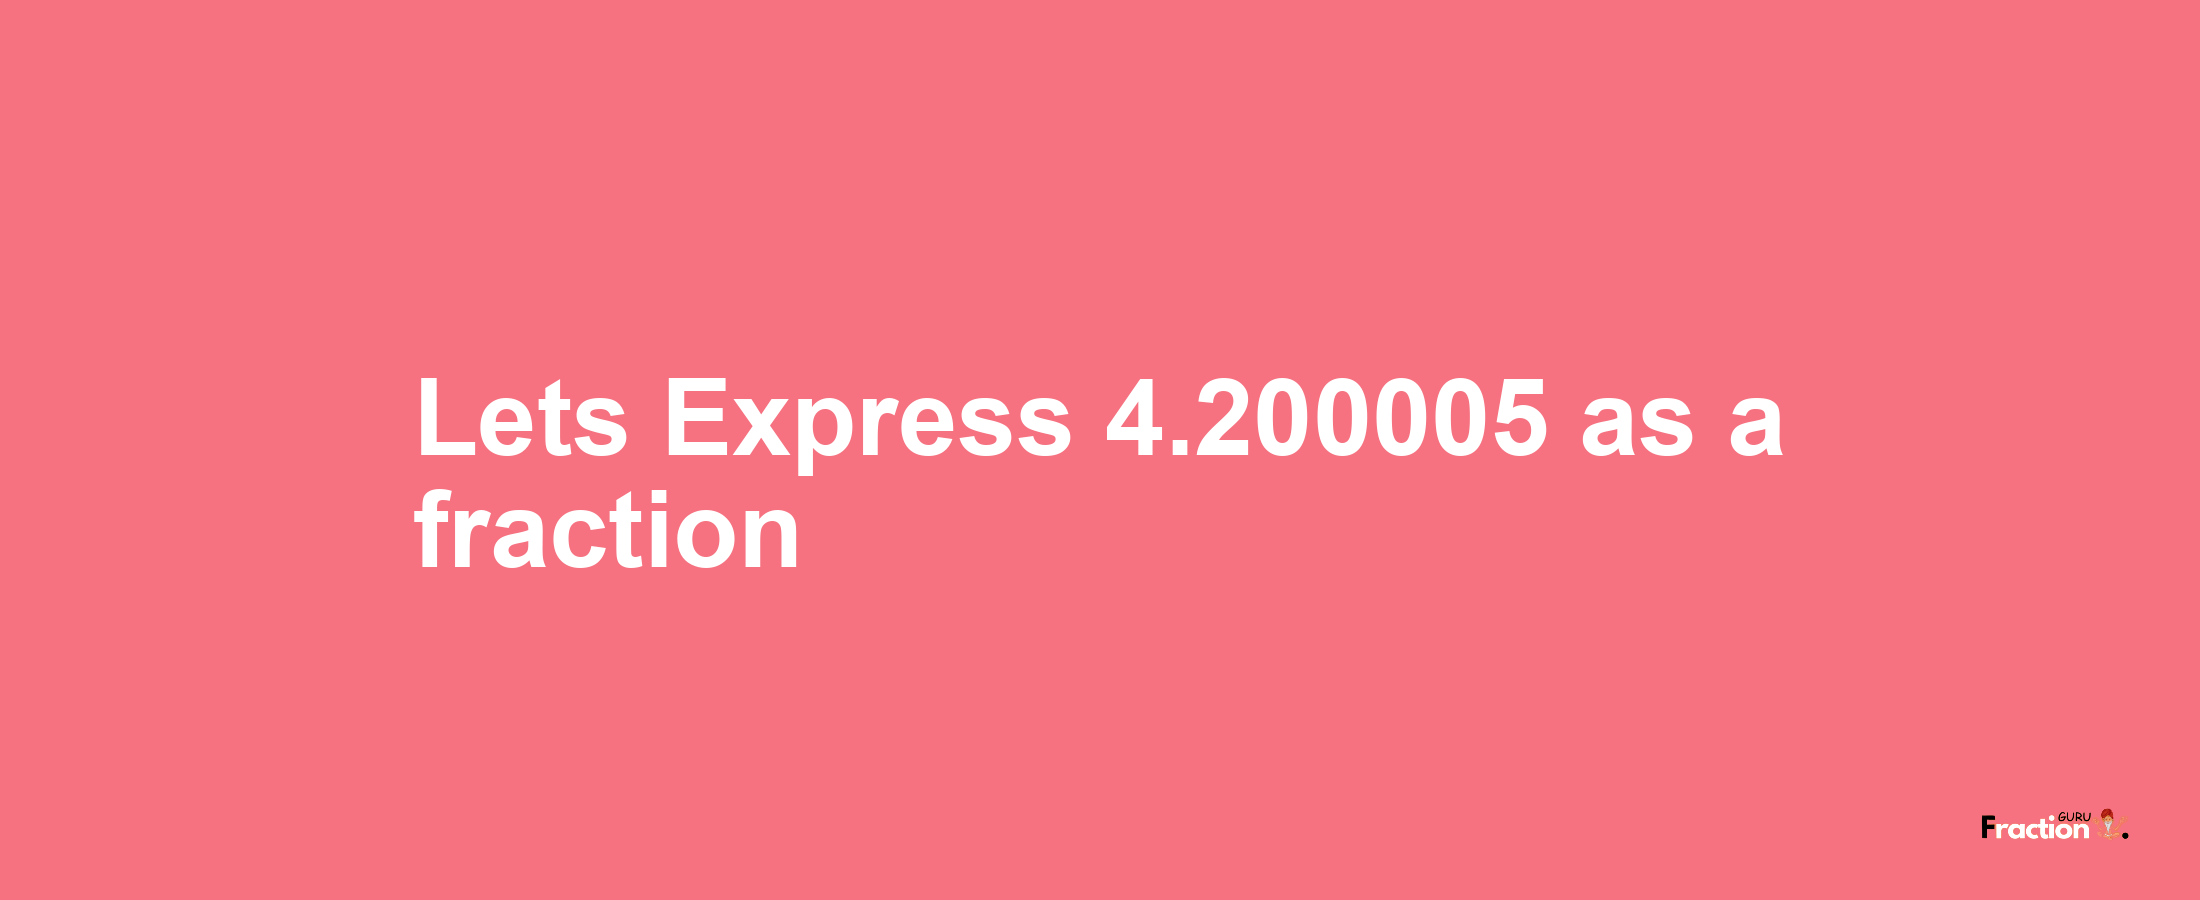 Lets Express 4.200005 as afraction